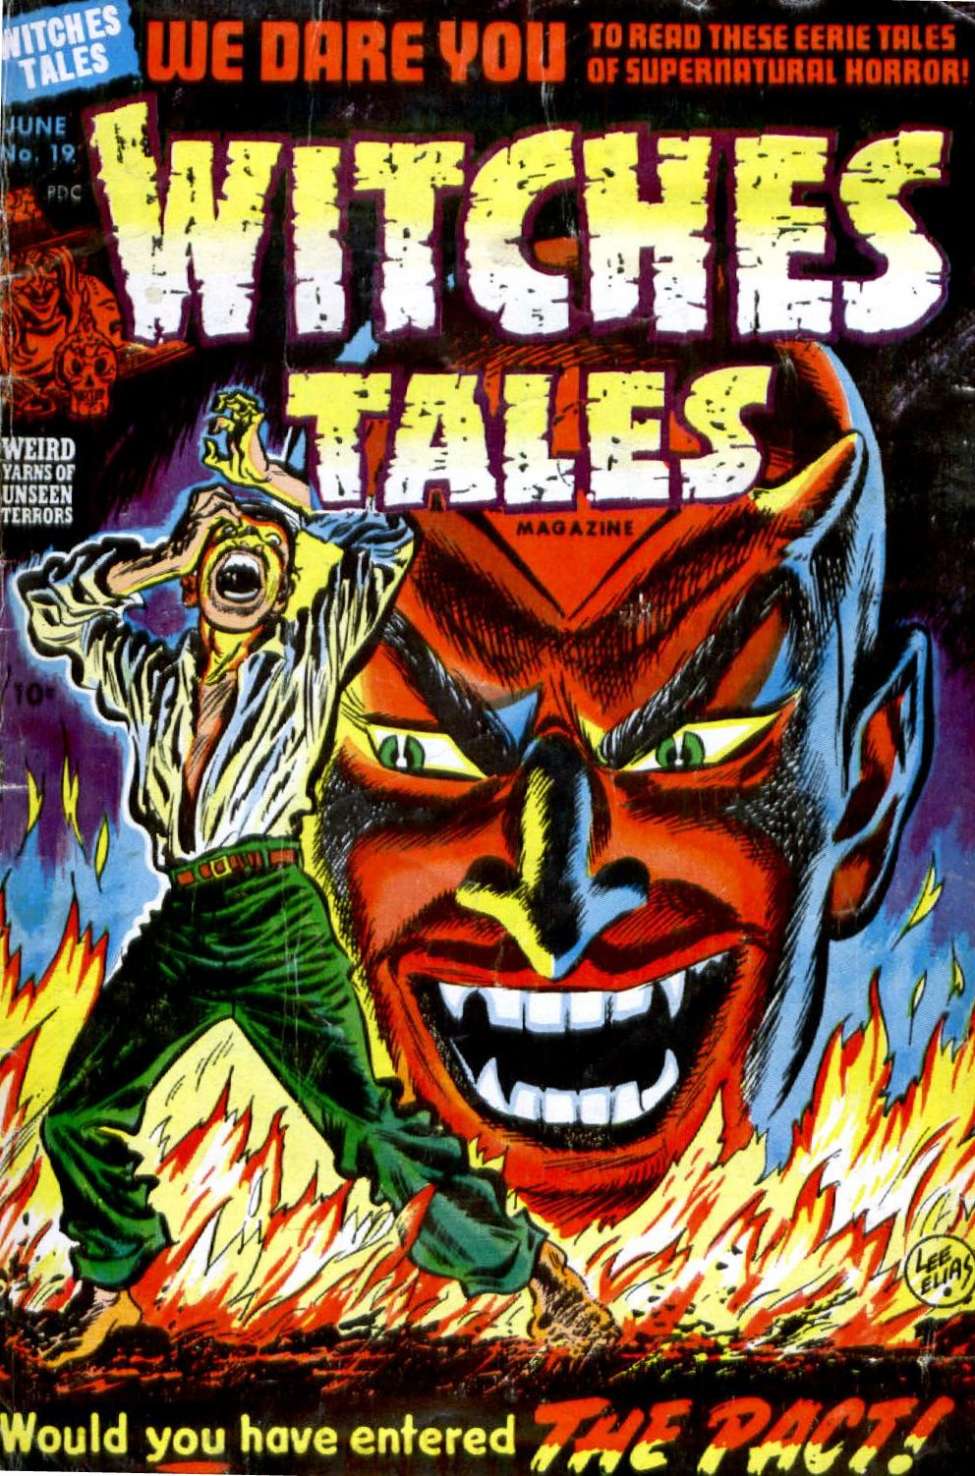 Book Cover For Witches Tales 19